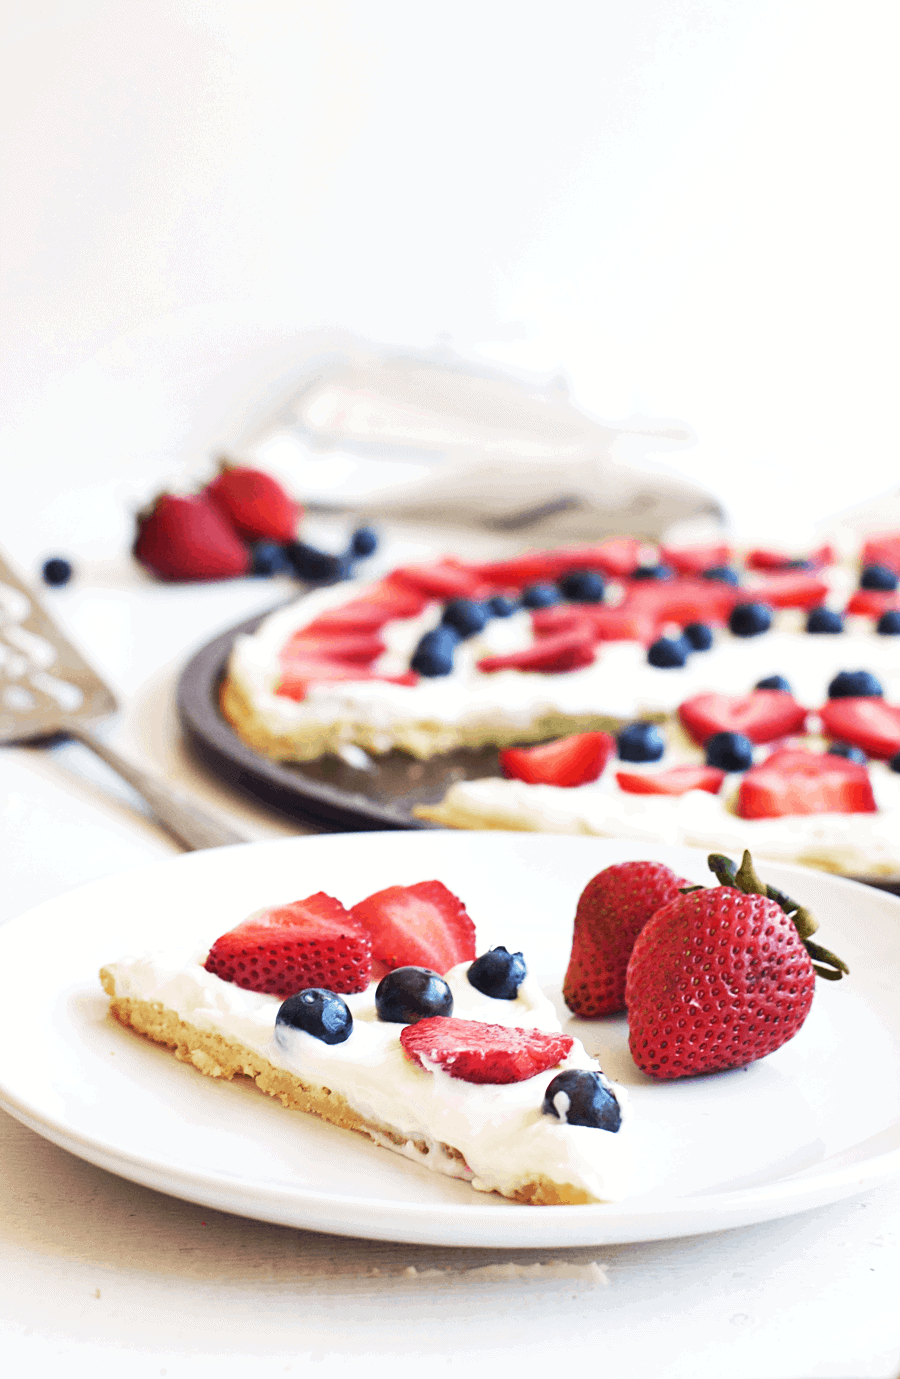 This 4th of July berry dessert pizza needs to be at the top of your list of festive foods to make! The combination of juicy, sweet berries and cream cheese icing spread on a sugar cookie crust is absolutely delicious. You’ll definitely be going back for seconds, maybe even thirds! || The Butter Half #easydessert #fruitpizza #summerrecipes #thebutterhalf